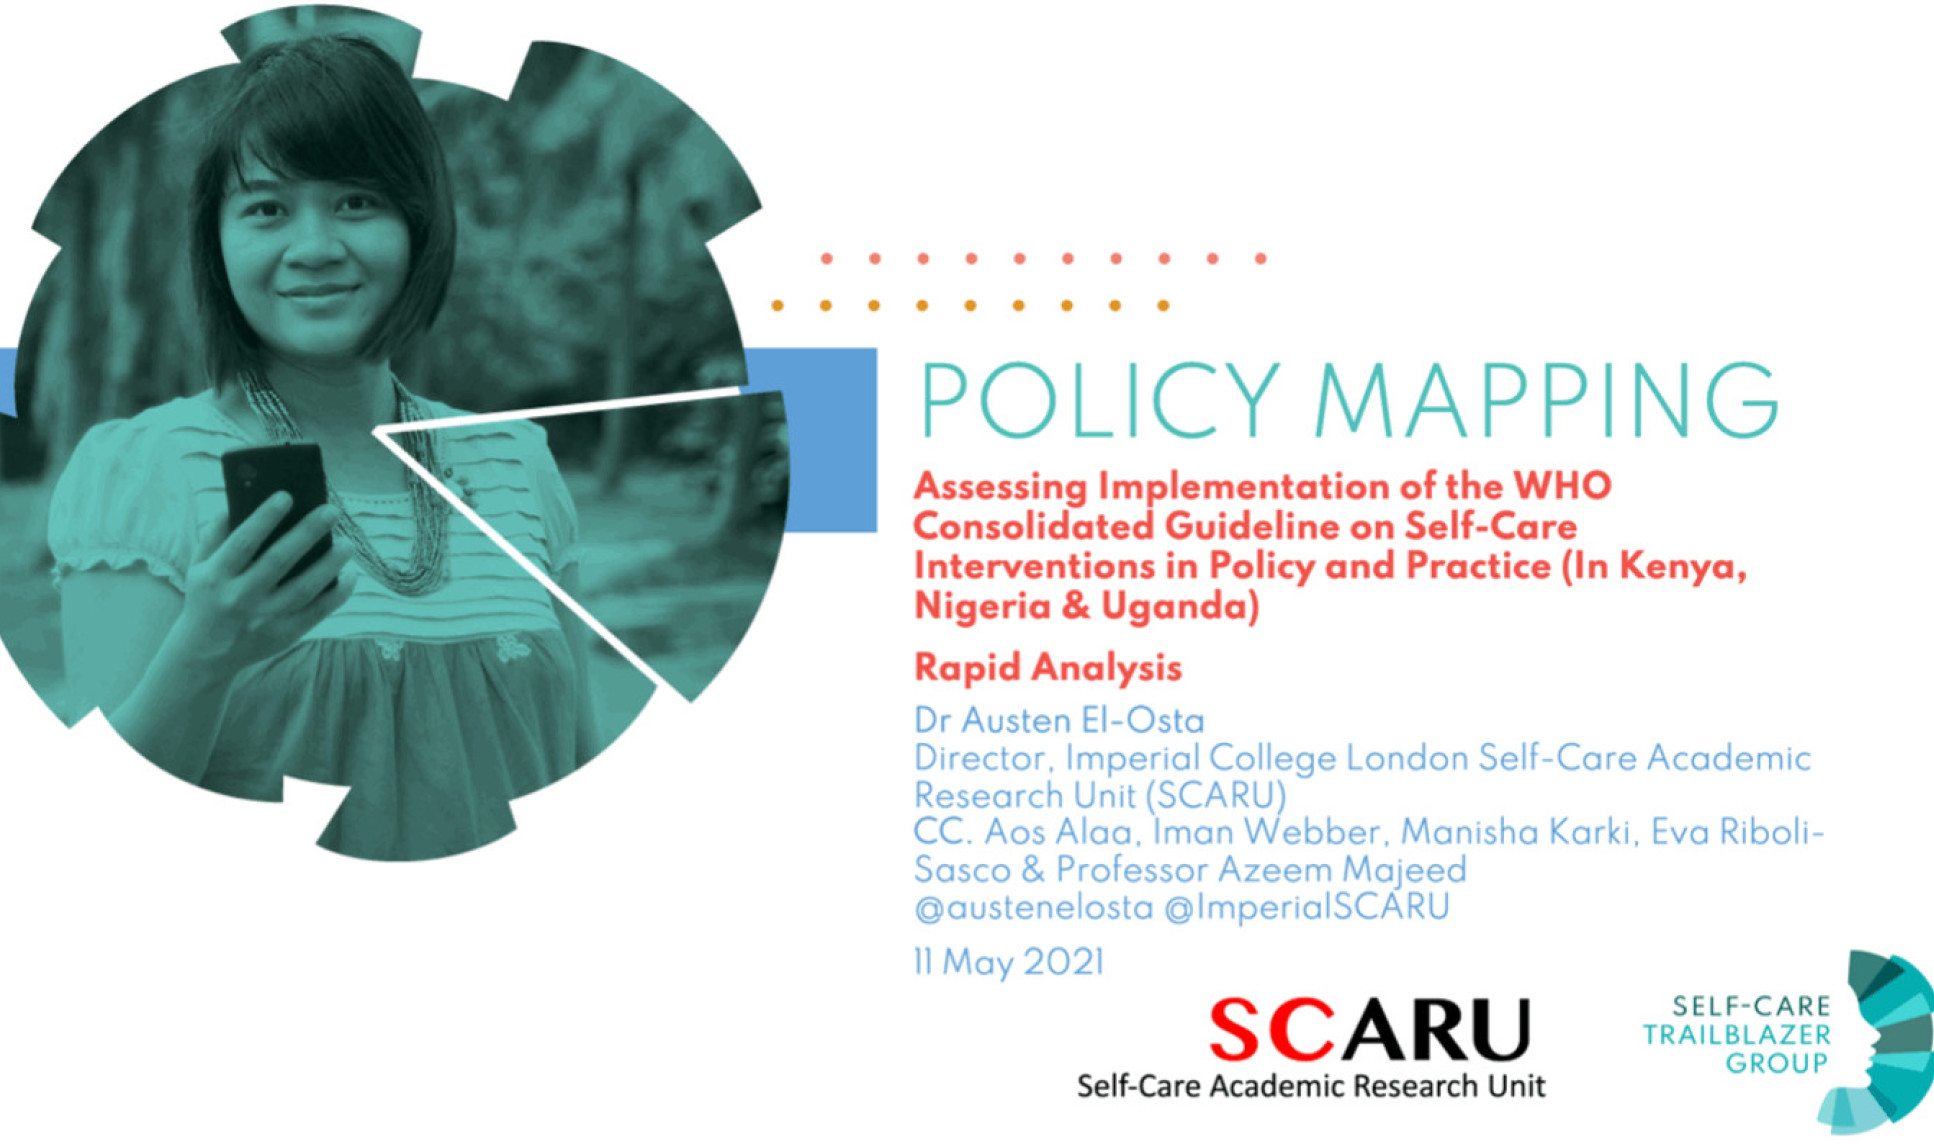 Policy mapping